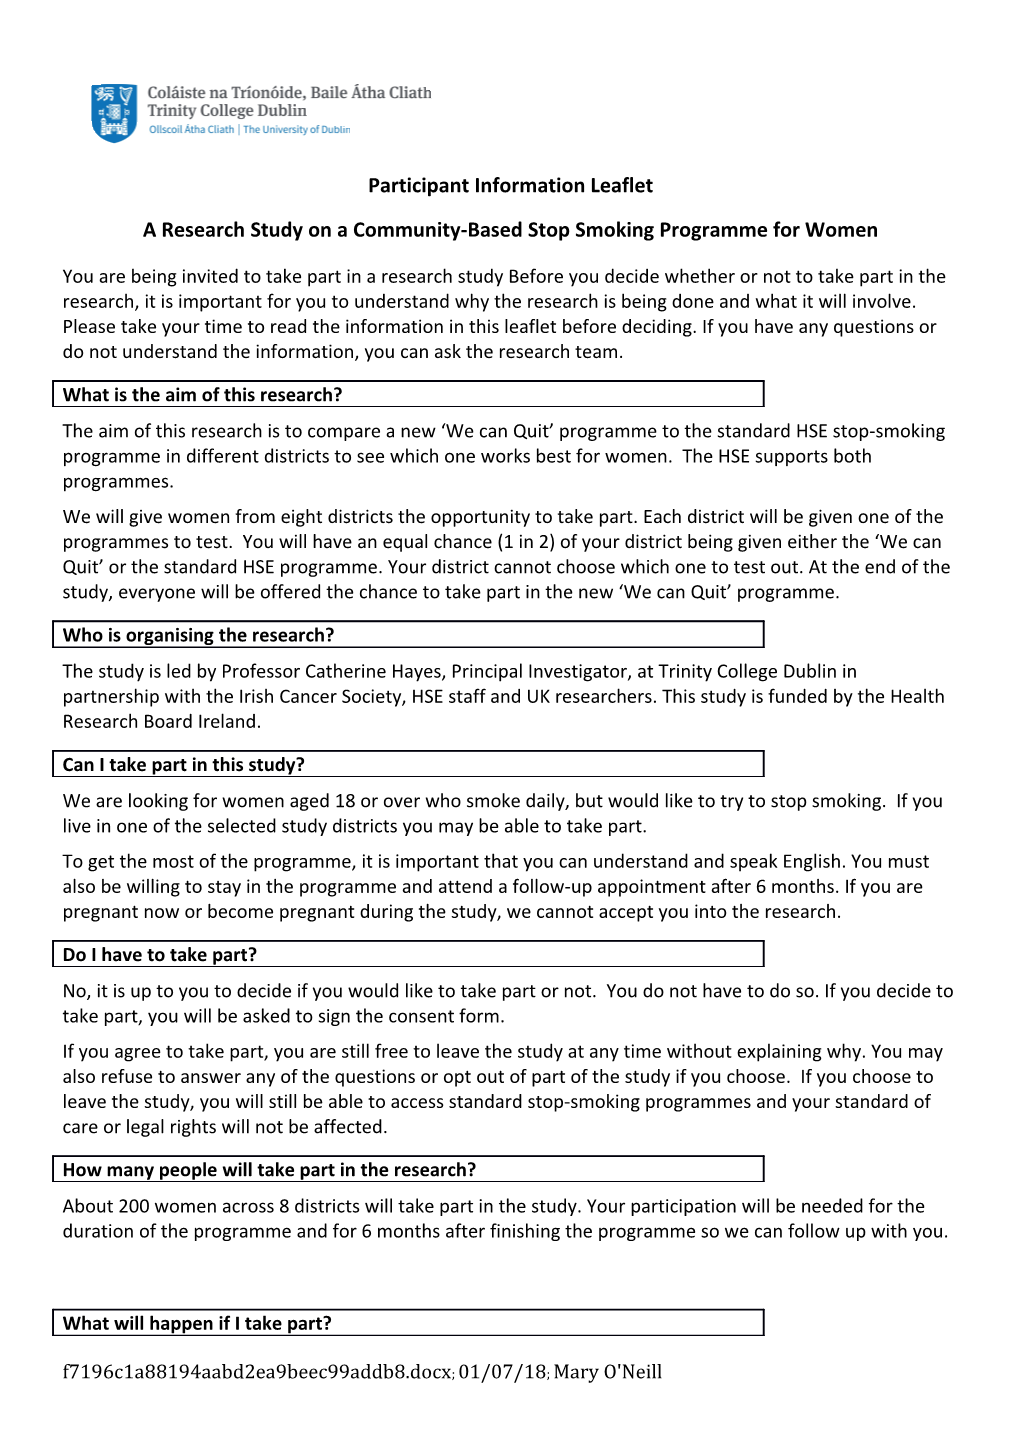 A Research Study on a Community-Based Stop Smoking Programme for Women